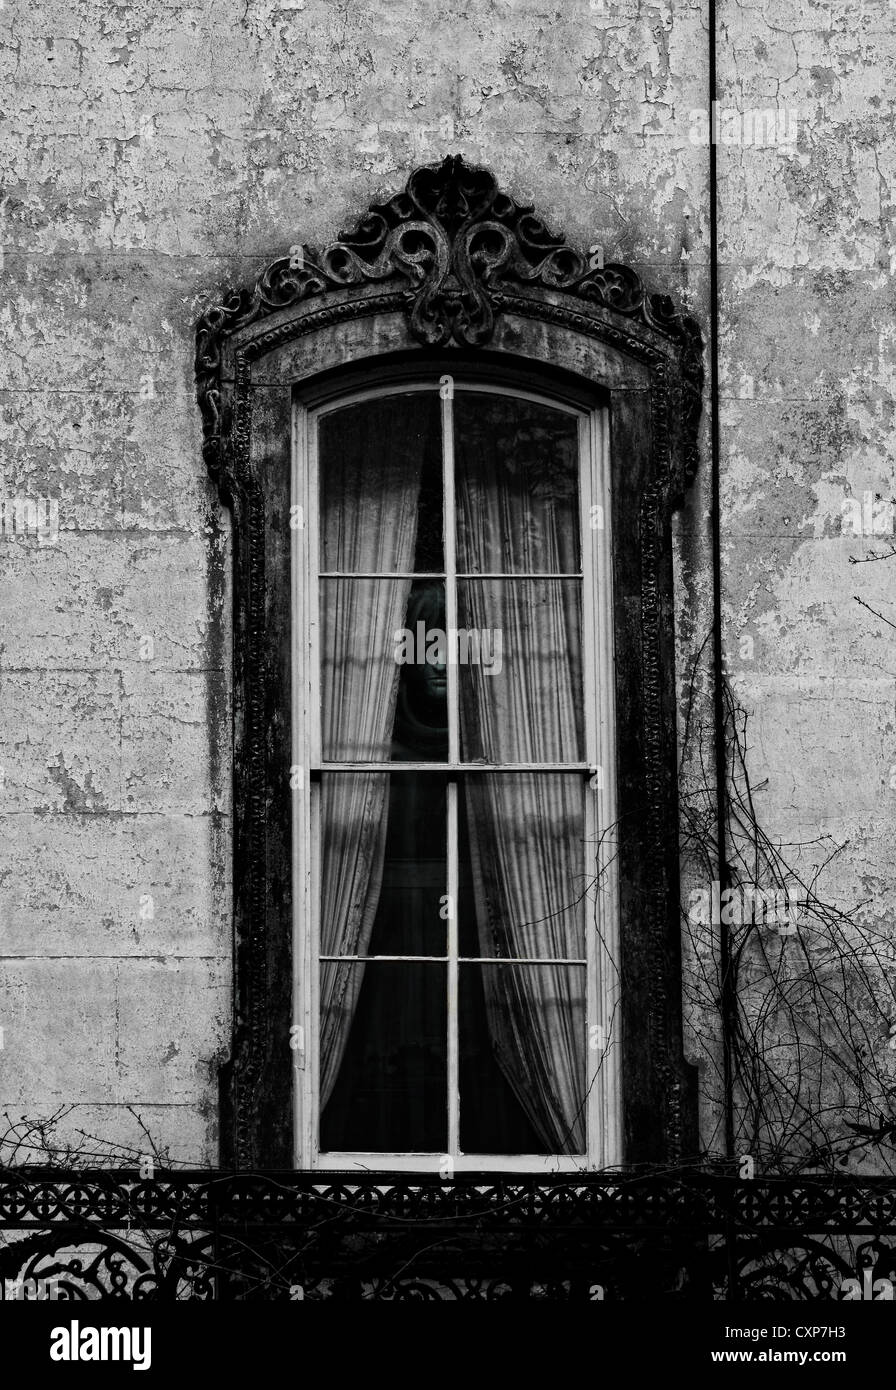 Ghost in the window Stock Photo